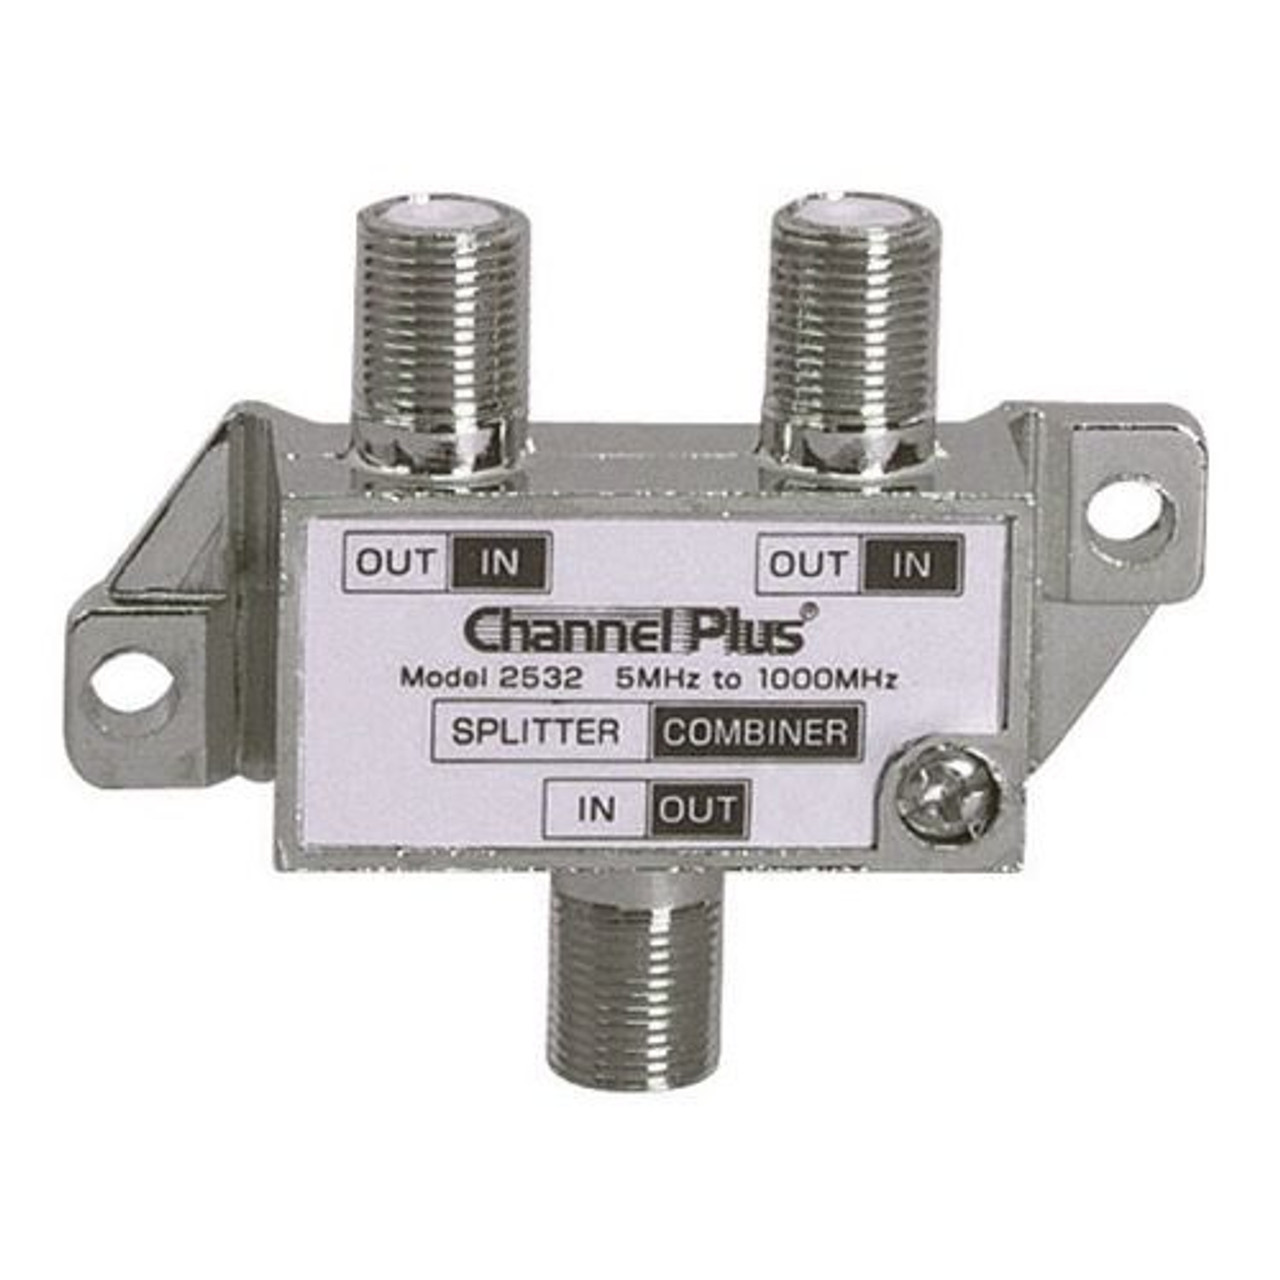 Channel Plus 2532 2 Way Splitter Combiner Bi-Directional 1 GHz Video Signal Coaxial DC Block Coax Cable Splitter UHF / VHF TV Antenna Combiner